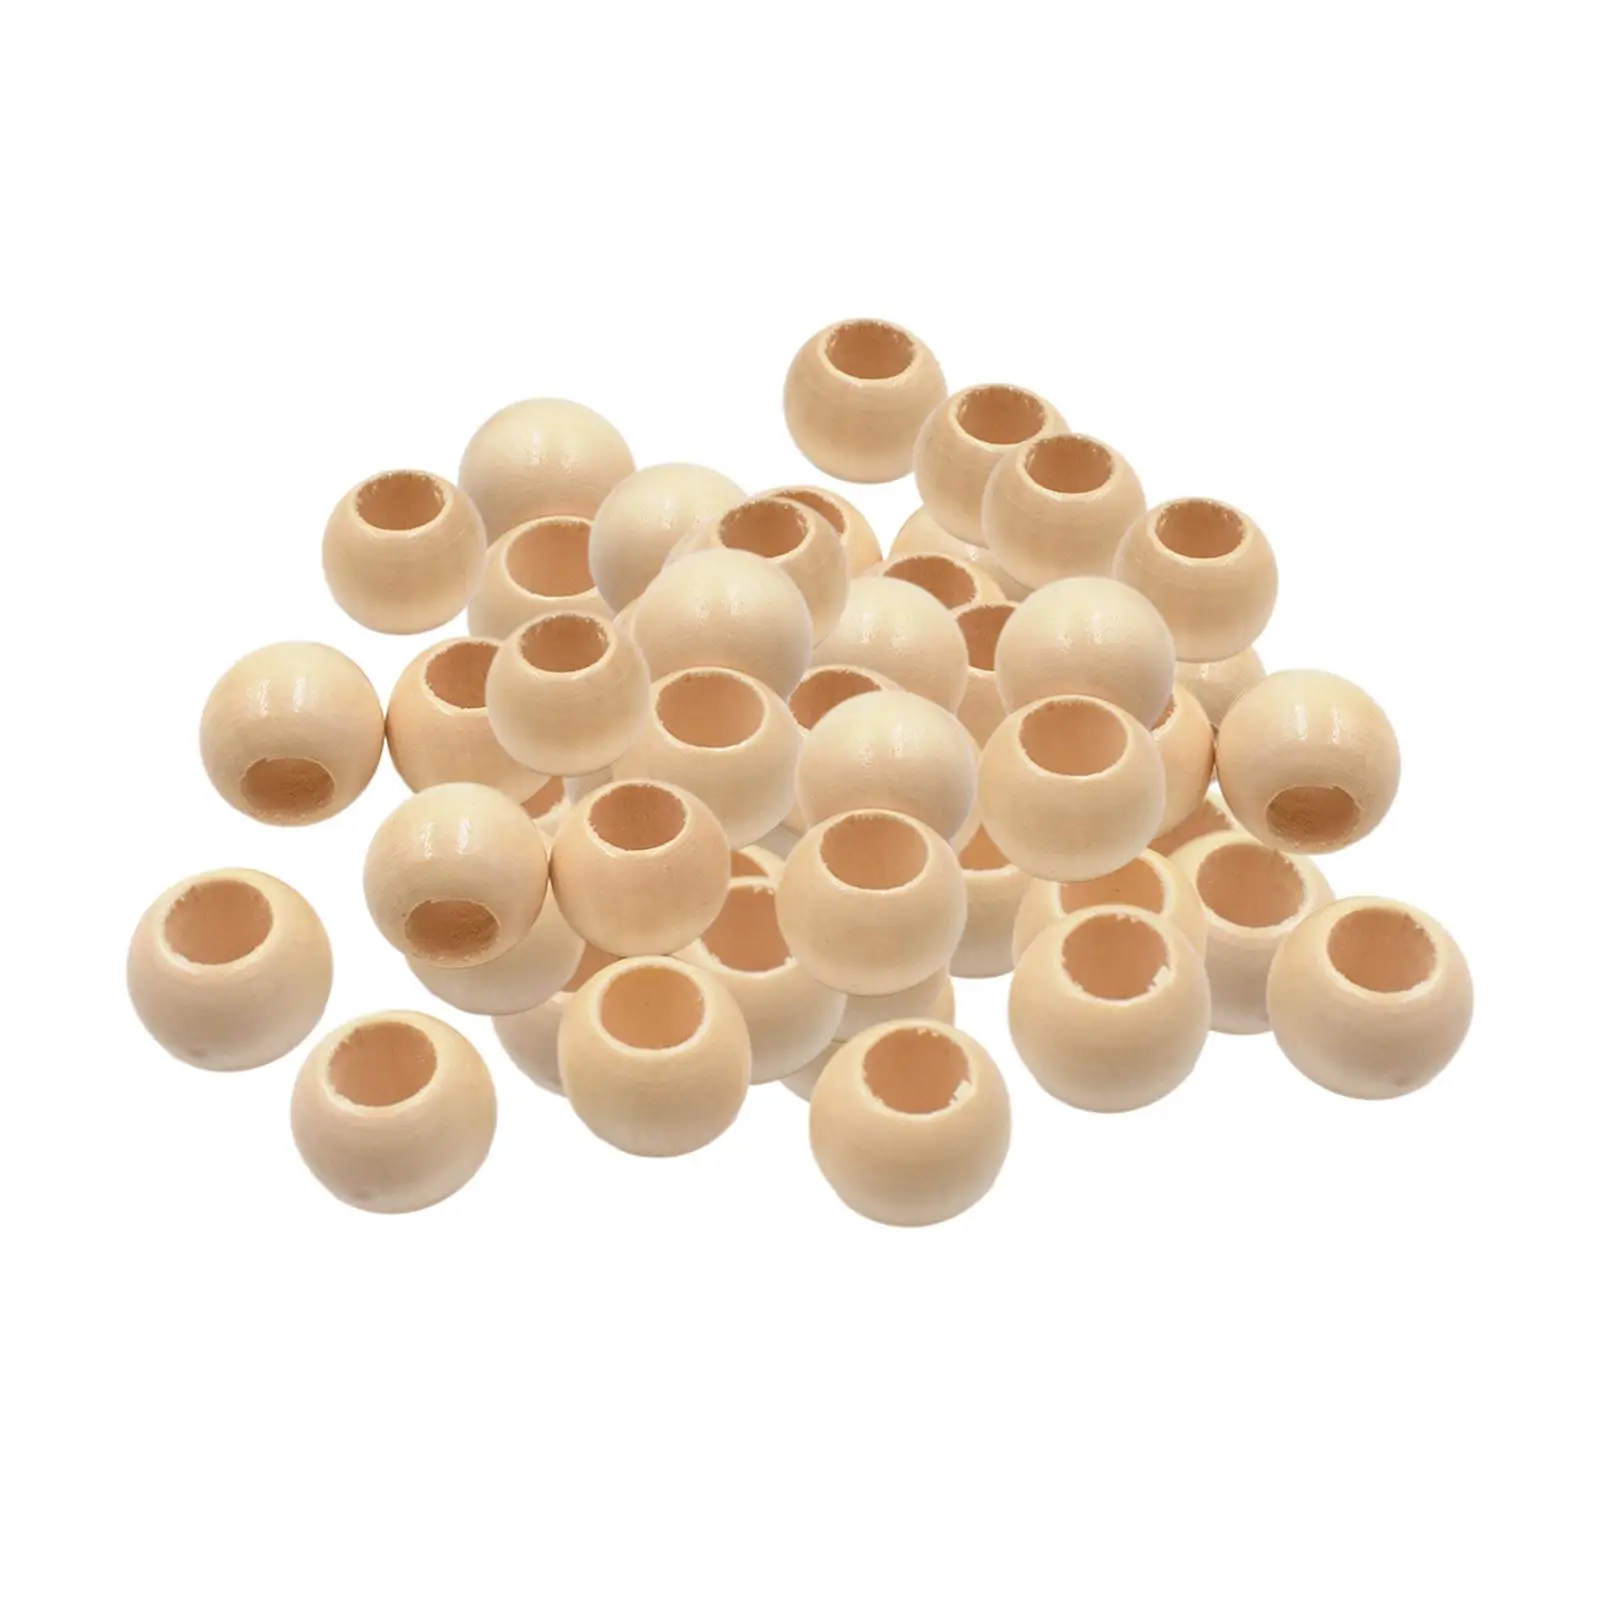 100Pcs Wood Beads Craft with Holes 20mm Spacer Bead Halloween Decorations for Jewelry Making Holiday Decoration Supplies Party